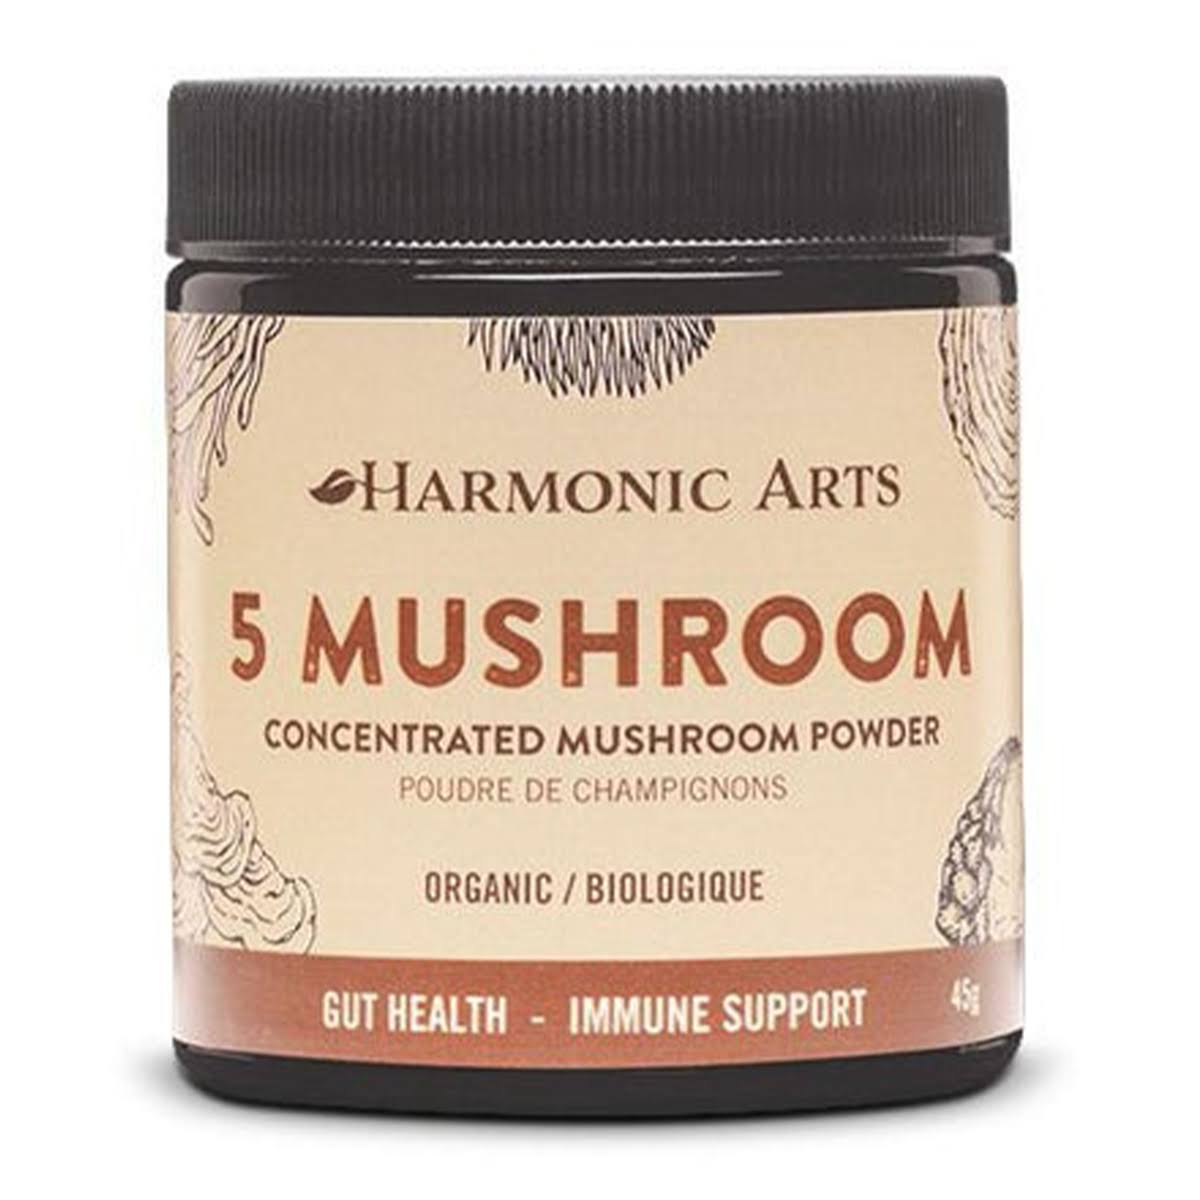 5 Mushroom Concentrated Mushroom Powder (Formerly Dual Extracted) - 45g